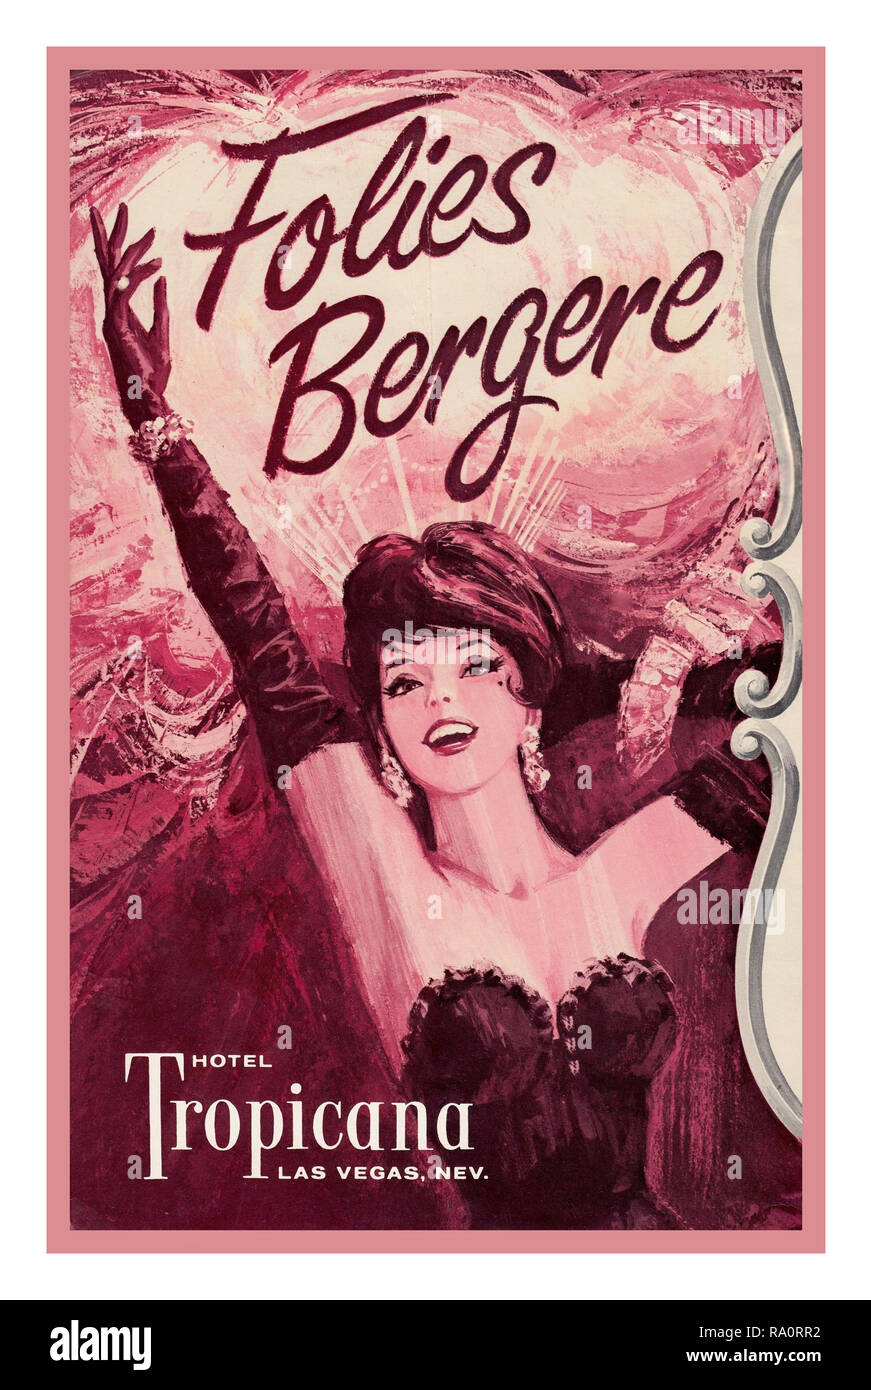 FOLIES BERGERE LAS VEGAS NEVADA Vintage entertainment poster 1950’s Las Vegas Tropicana Hotel. The Folies Bergere stage show offered song and dance numbers, novelty acts, and showgirls. Imported directly from Paris, the all French production was a mainstay on the Las Vegas Entertainment Strip for nearly half a century. Las Vegas Nevada USA Stock Photo